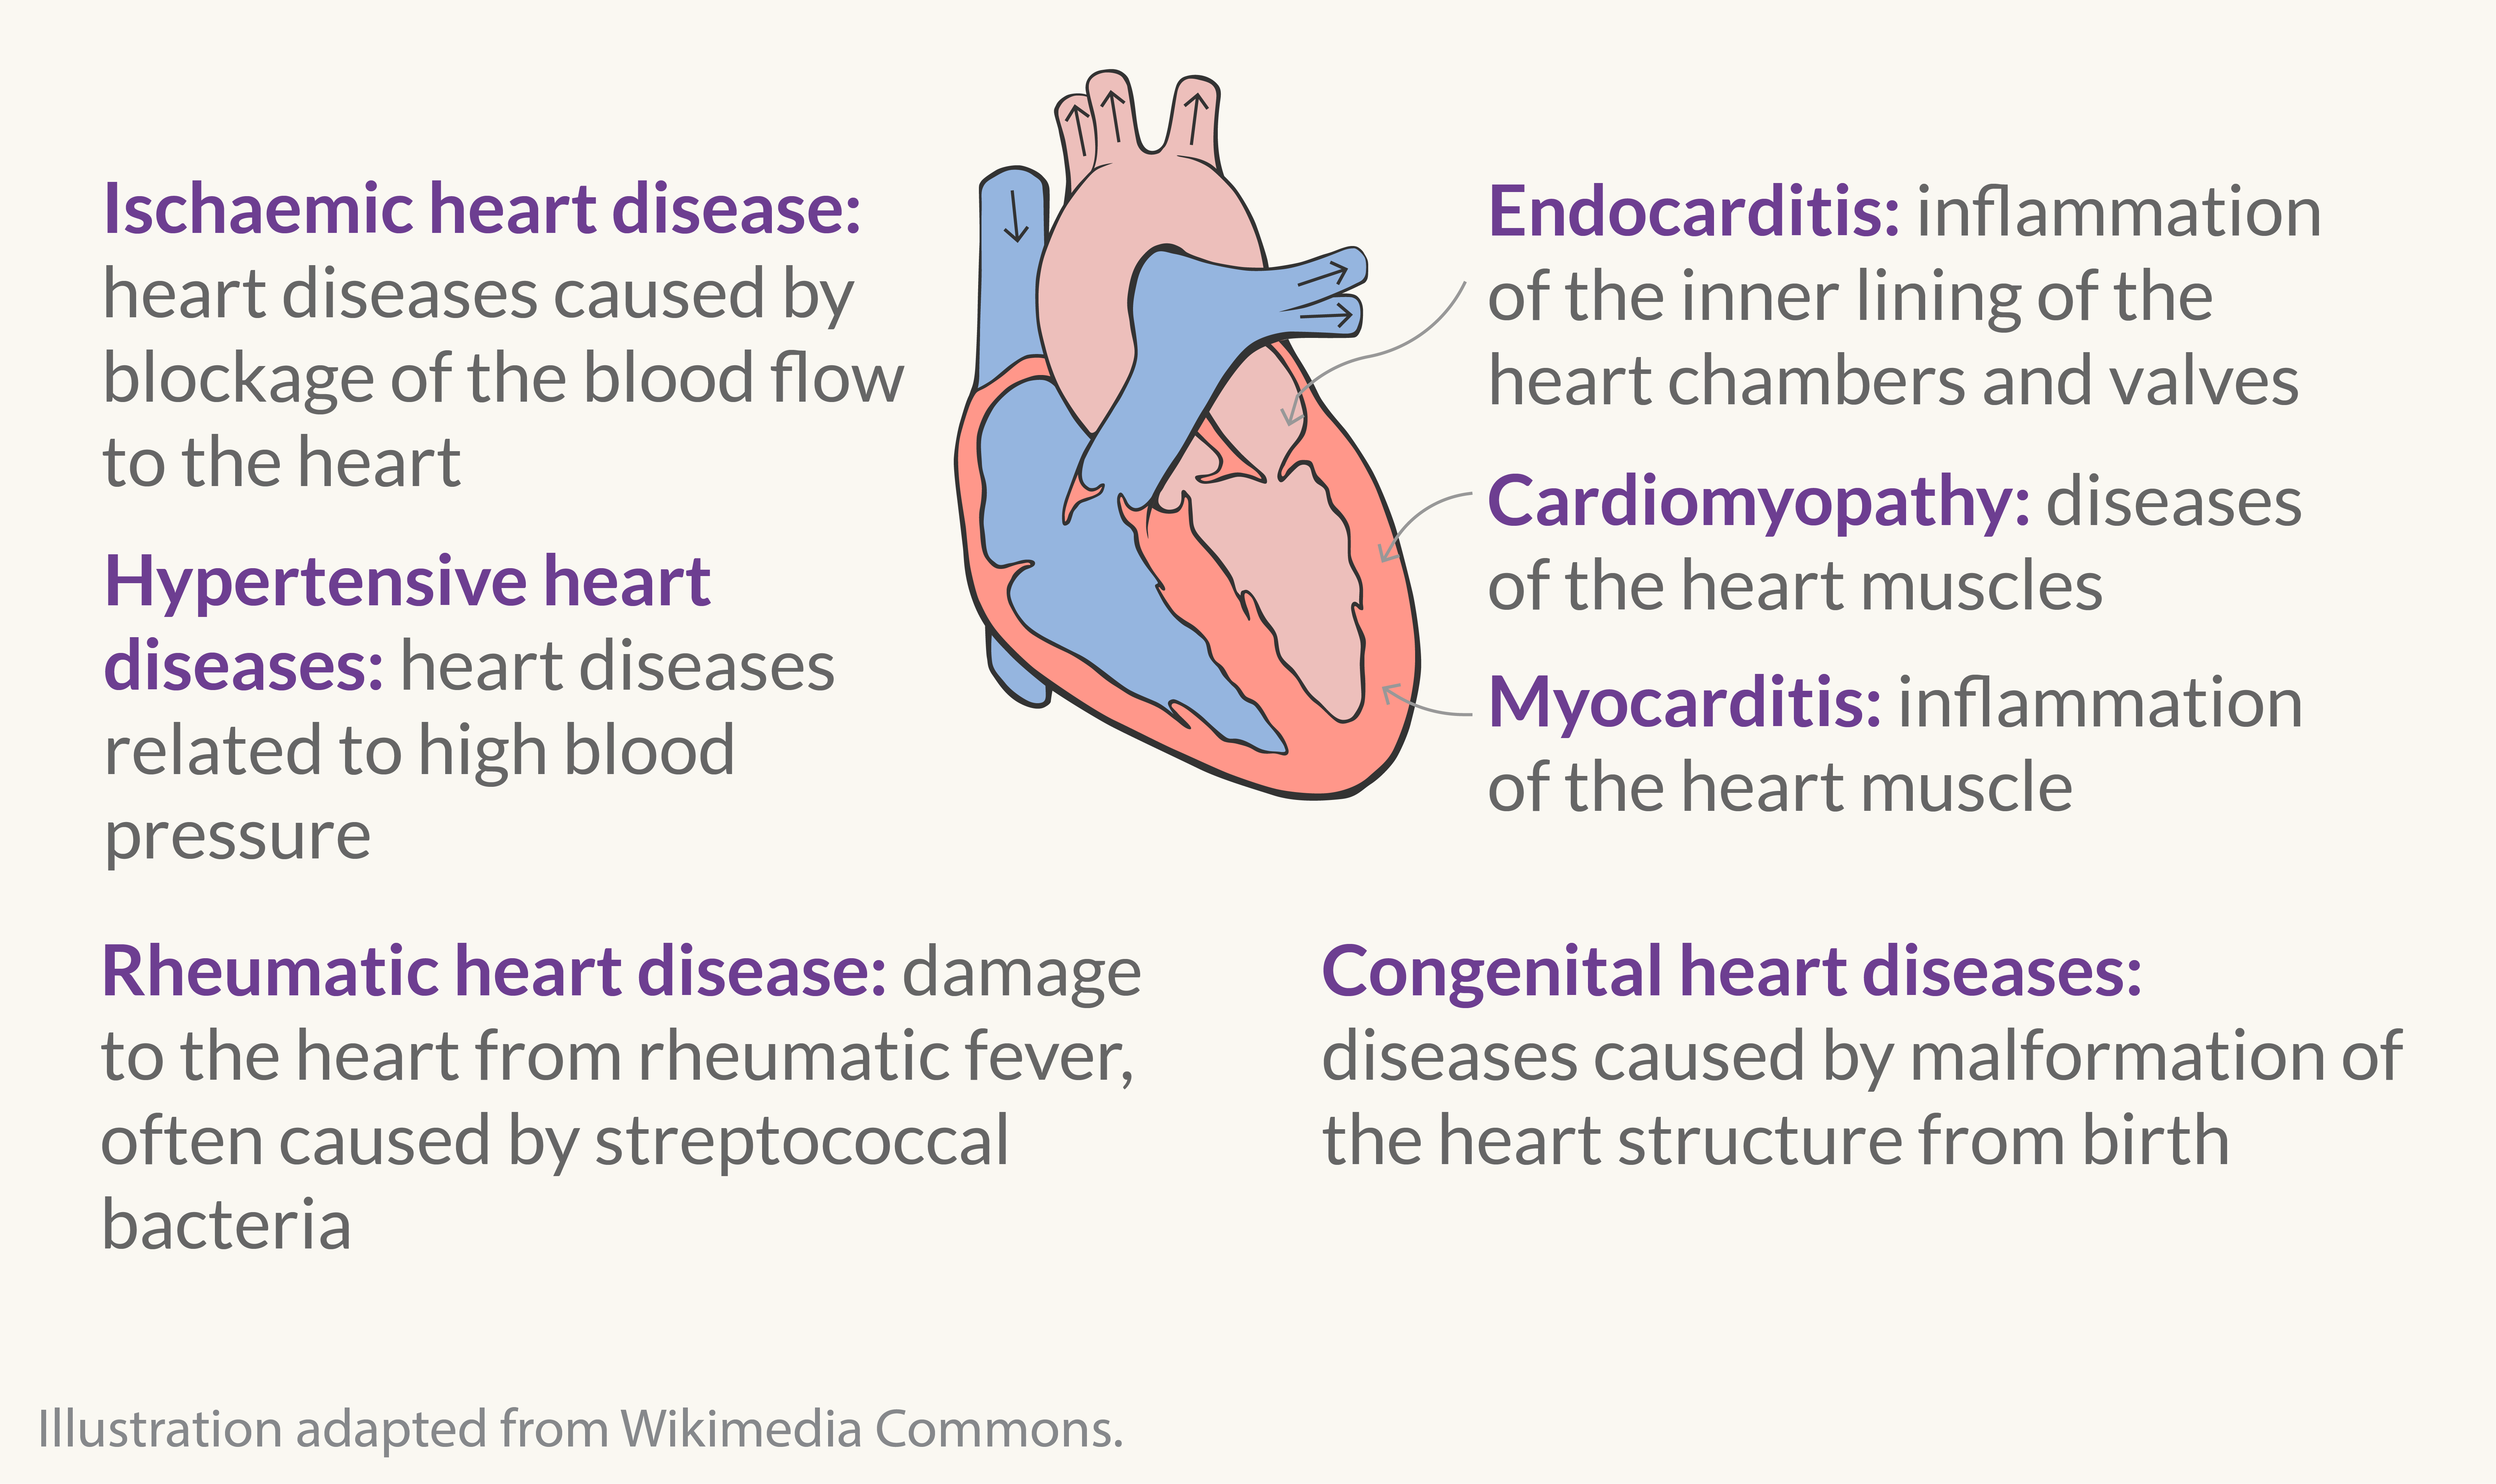 Illustration of cardiovascular diseases of the heart